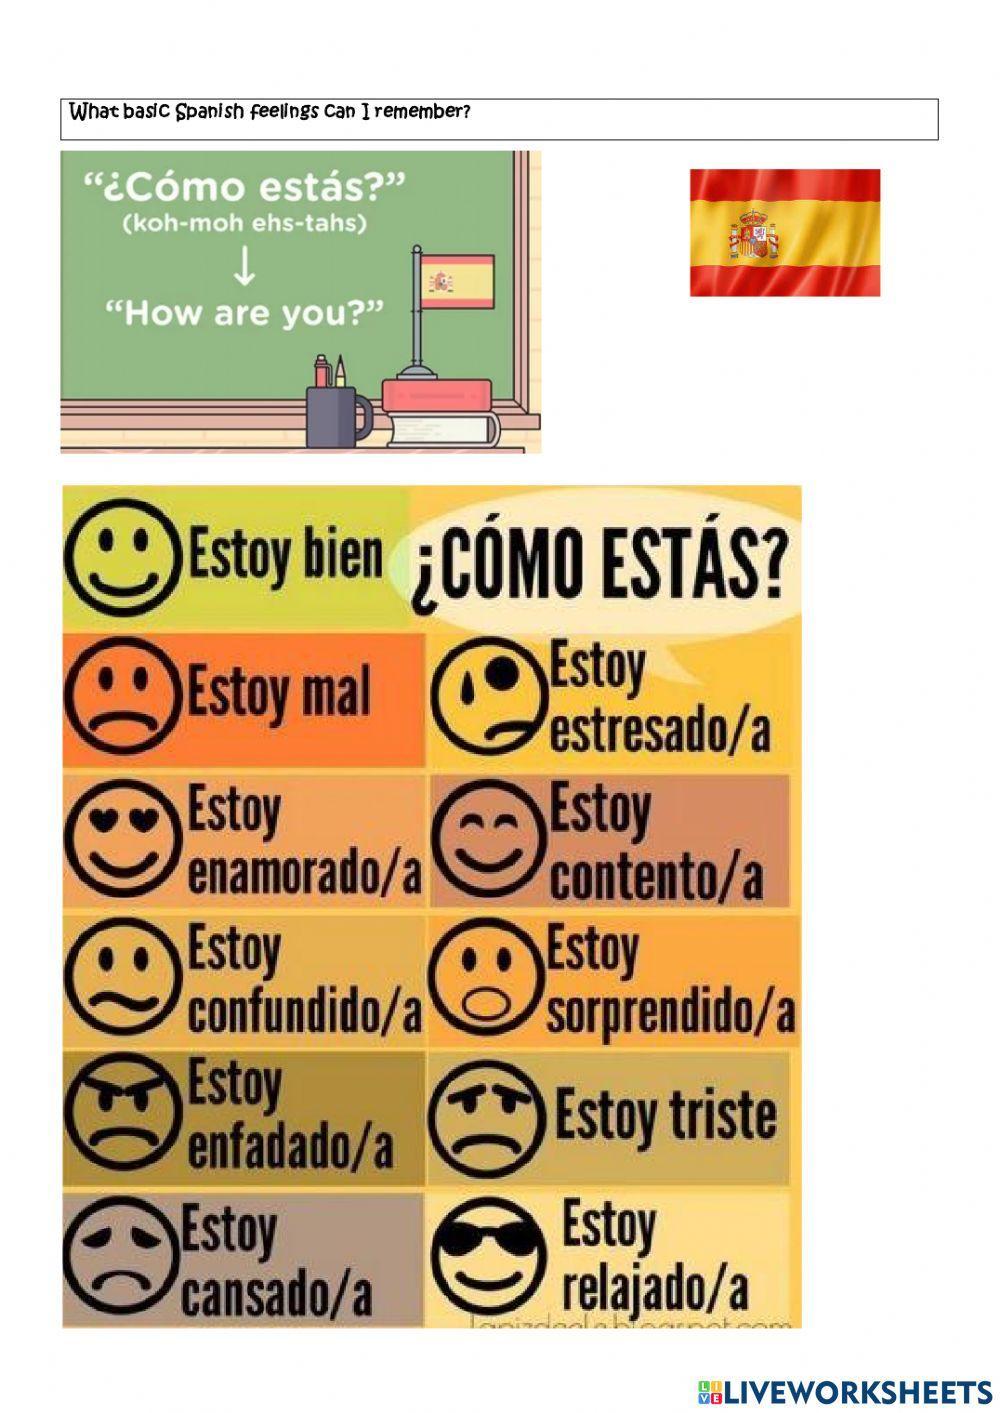 Spanish - routines and feelings